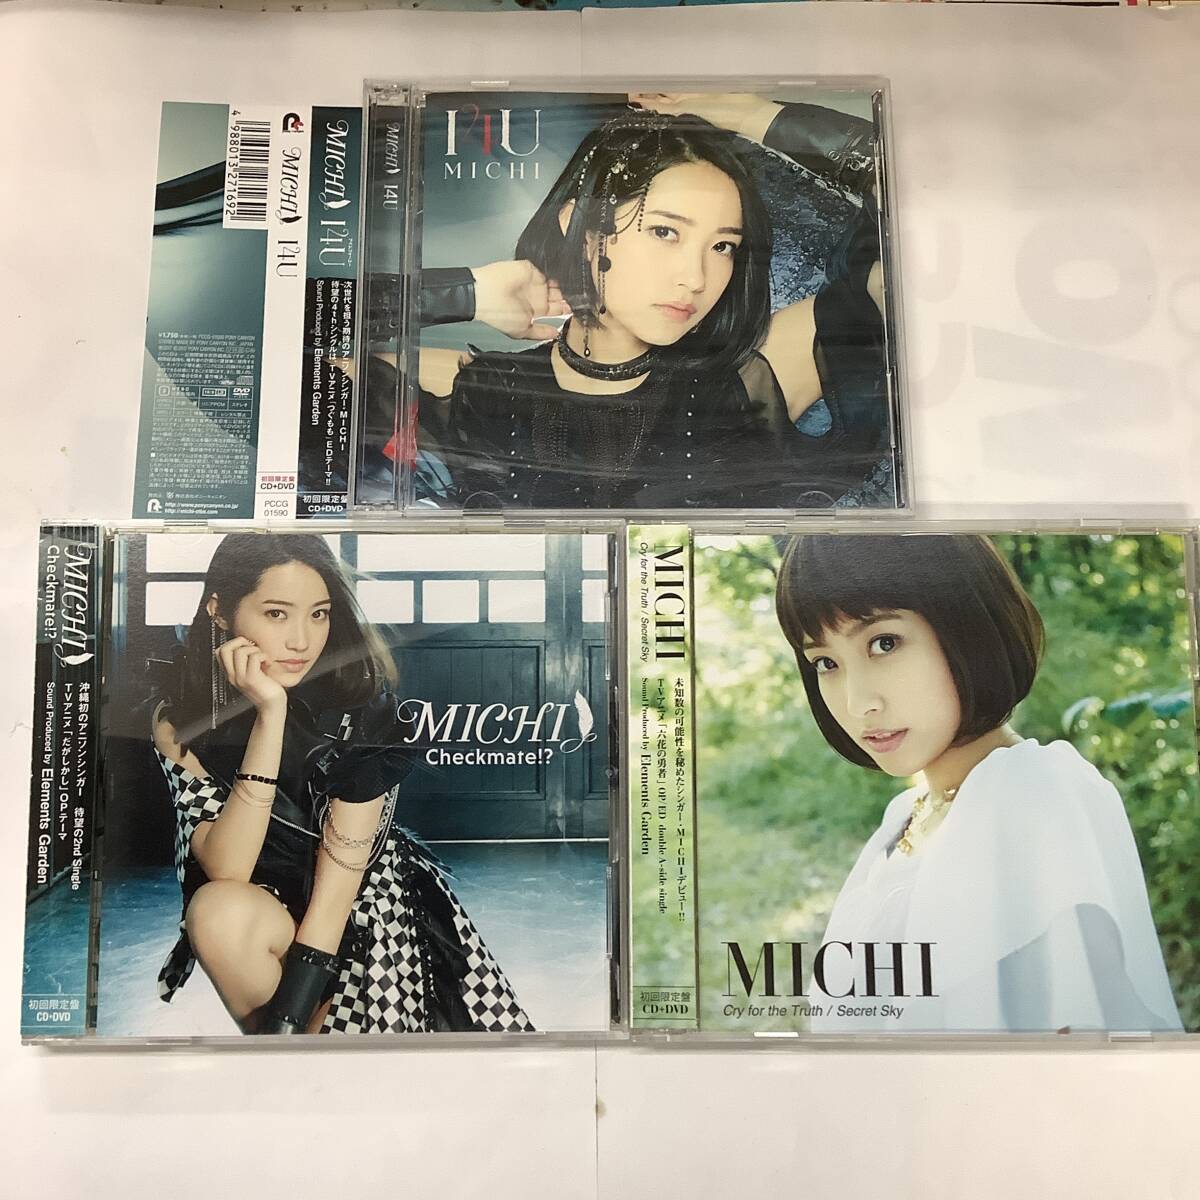 MICHI 3CD+DVD 全て初回限定盤 Checkmate!? I4U Cry for the Truth Secret Sky_画像2